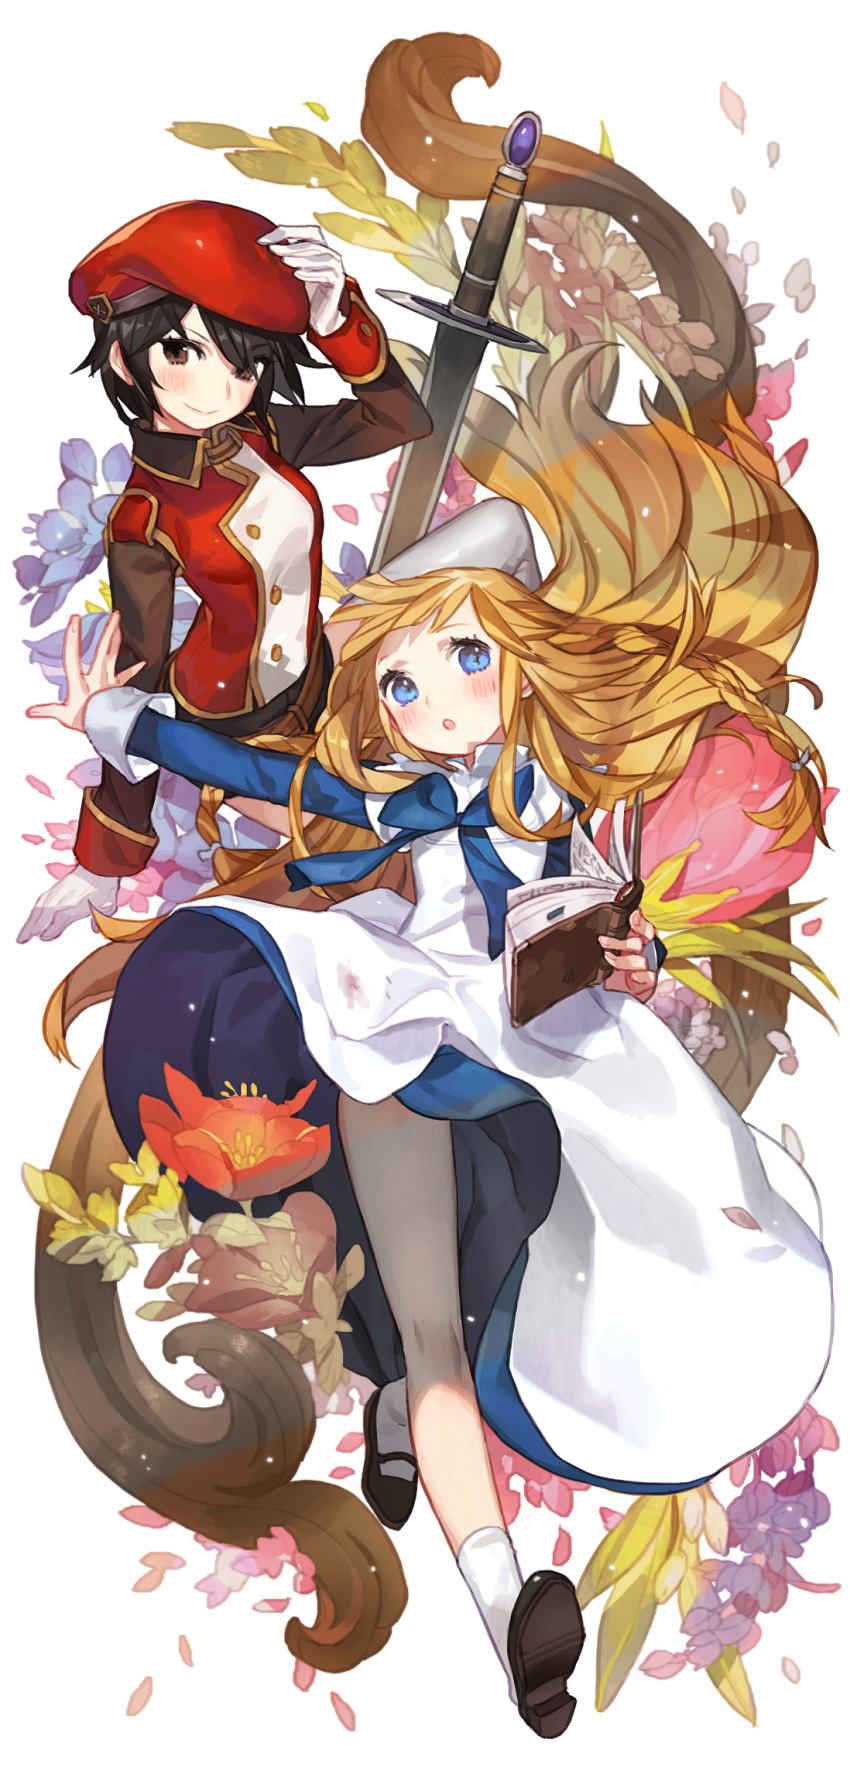 2girls apron beret black_hair blonde_hair blue_eyes blush book bow cap dress flower gloves gwayo hand_on_hat hat highres ispin_charles long_hair mary_janes multiple_girls open_mouth shoes short_hair smile socks sword tagme tales_weaver tichiel_juspian weapon